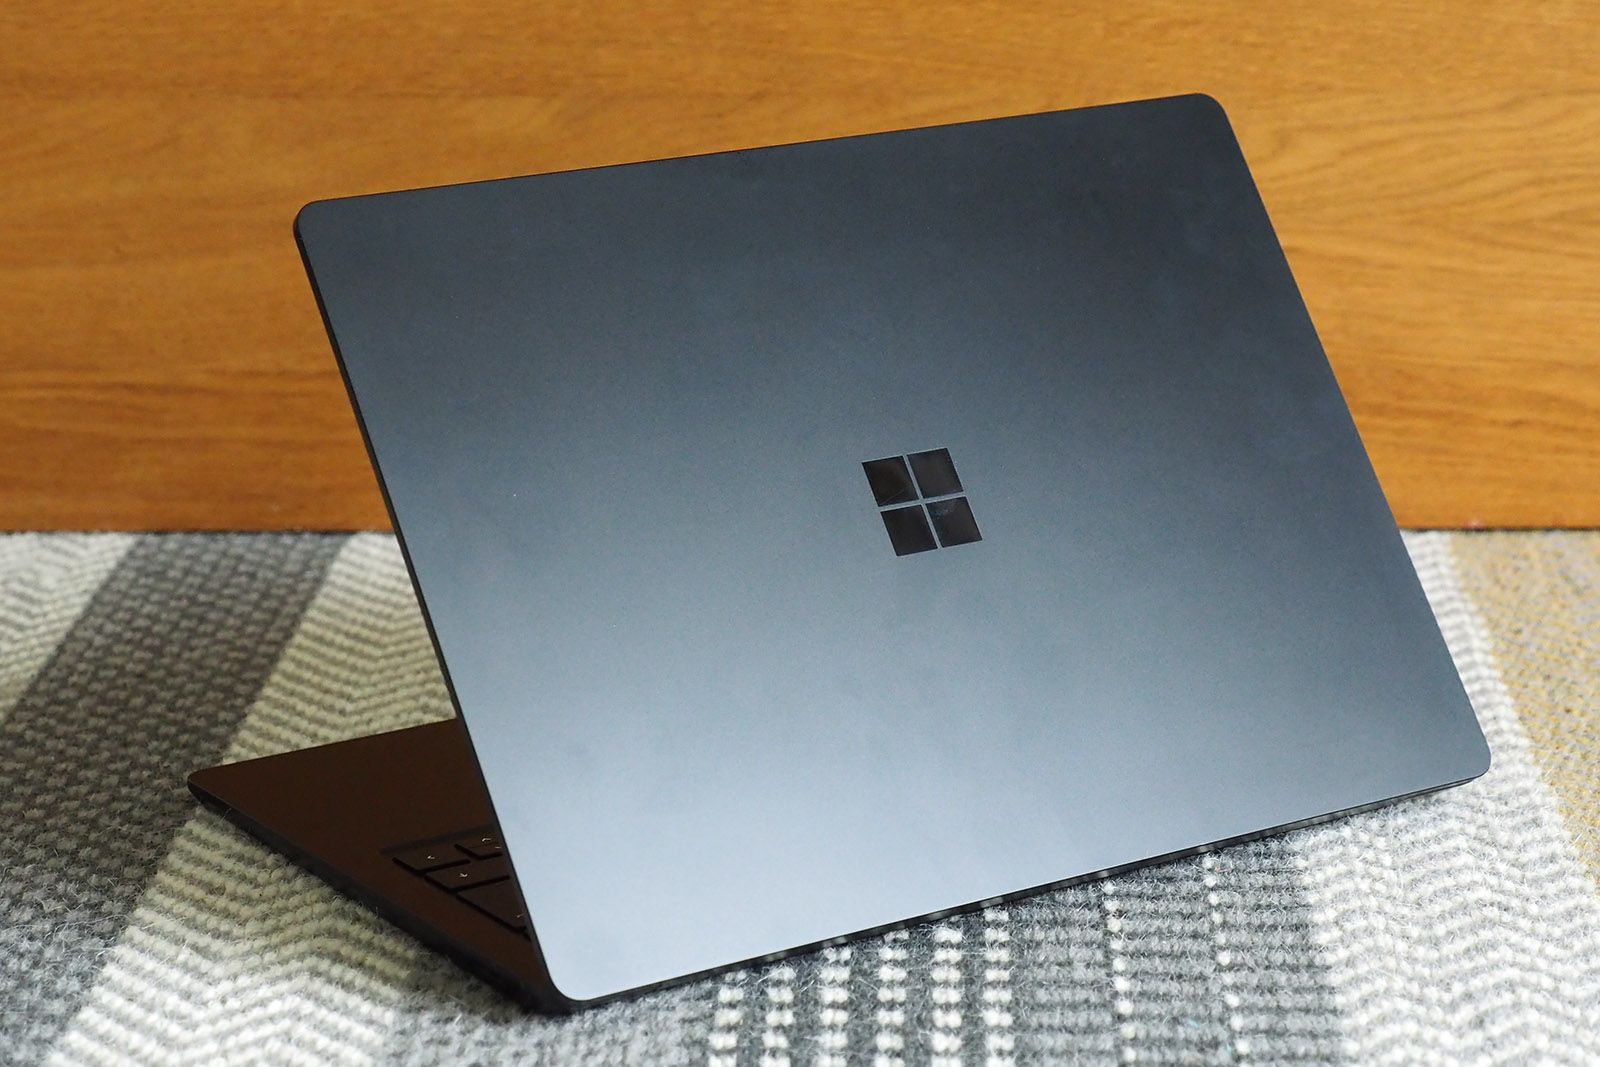 Microsoft Surface Laptop 3 (13.5-inch) review photo 2